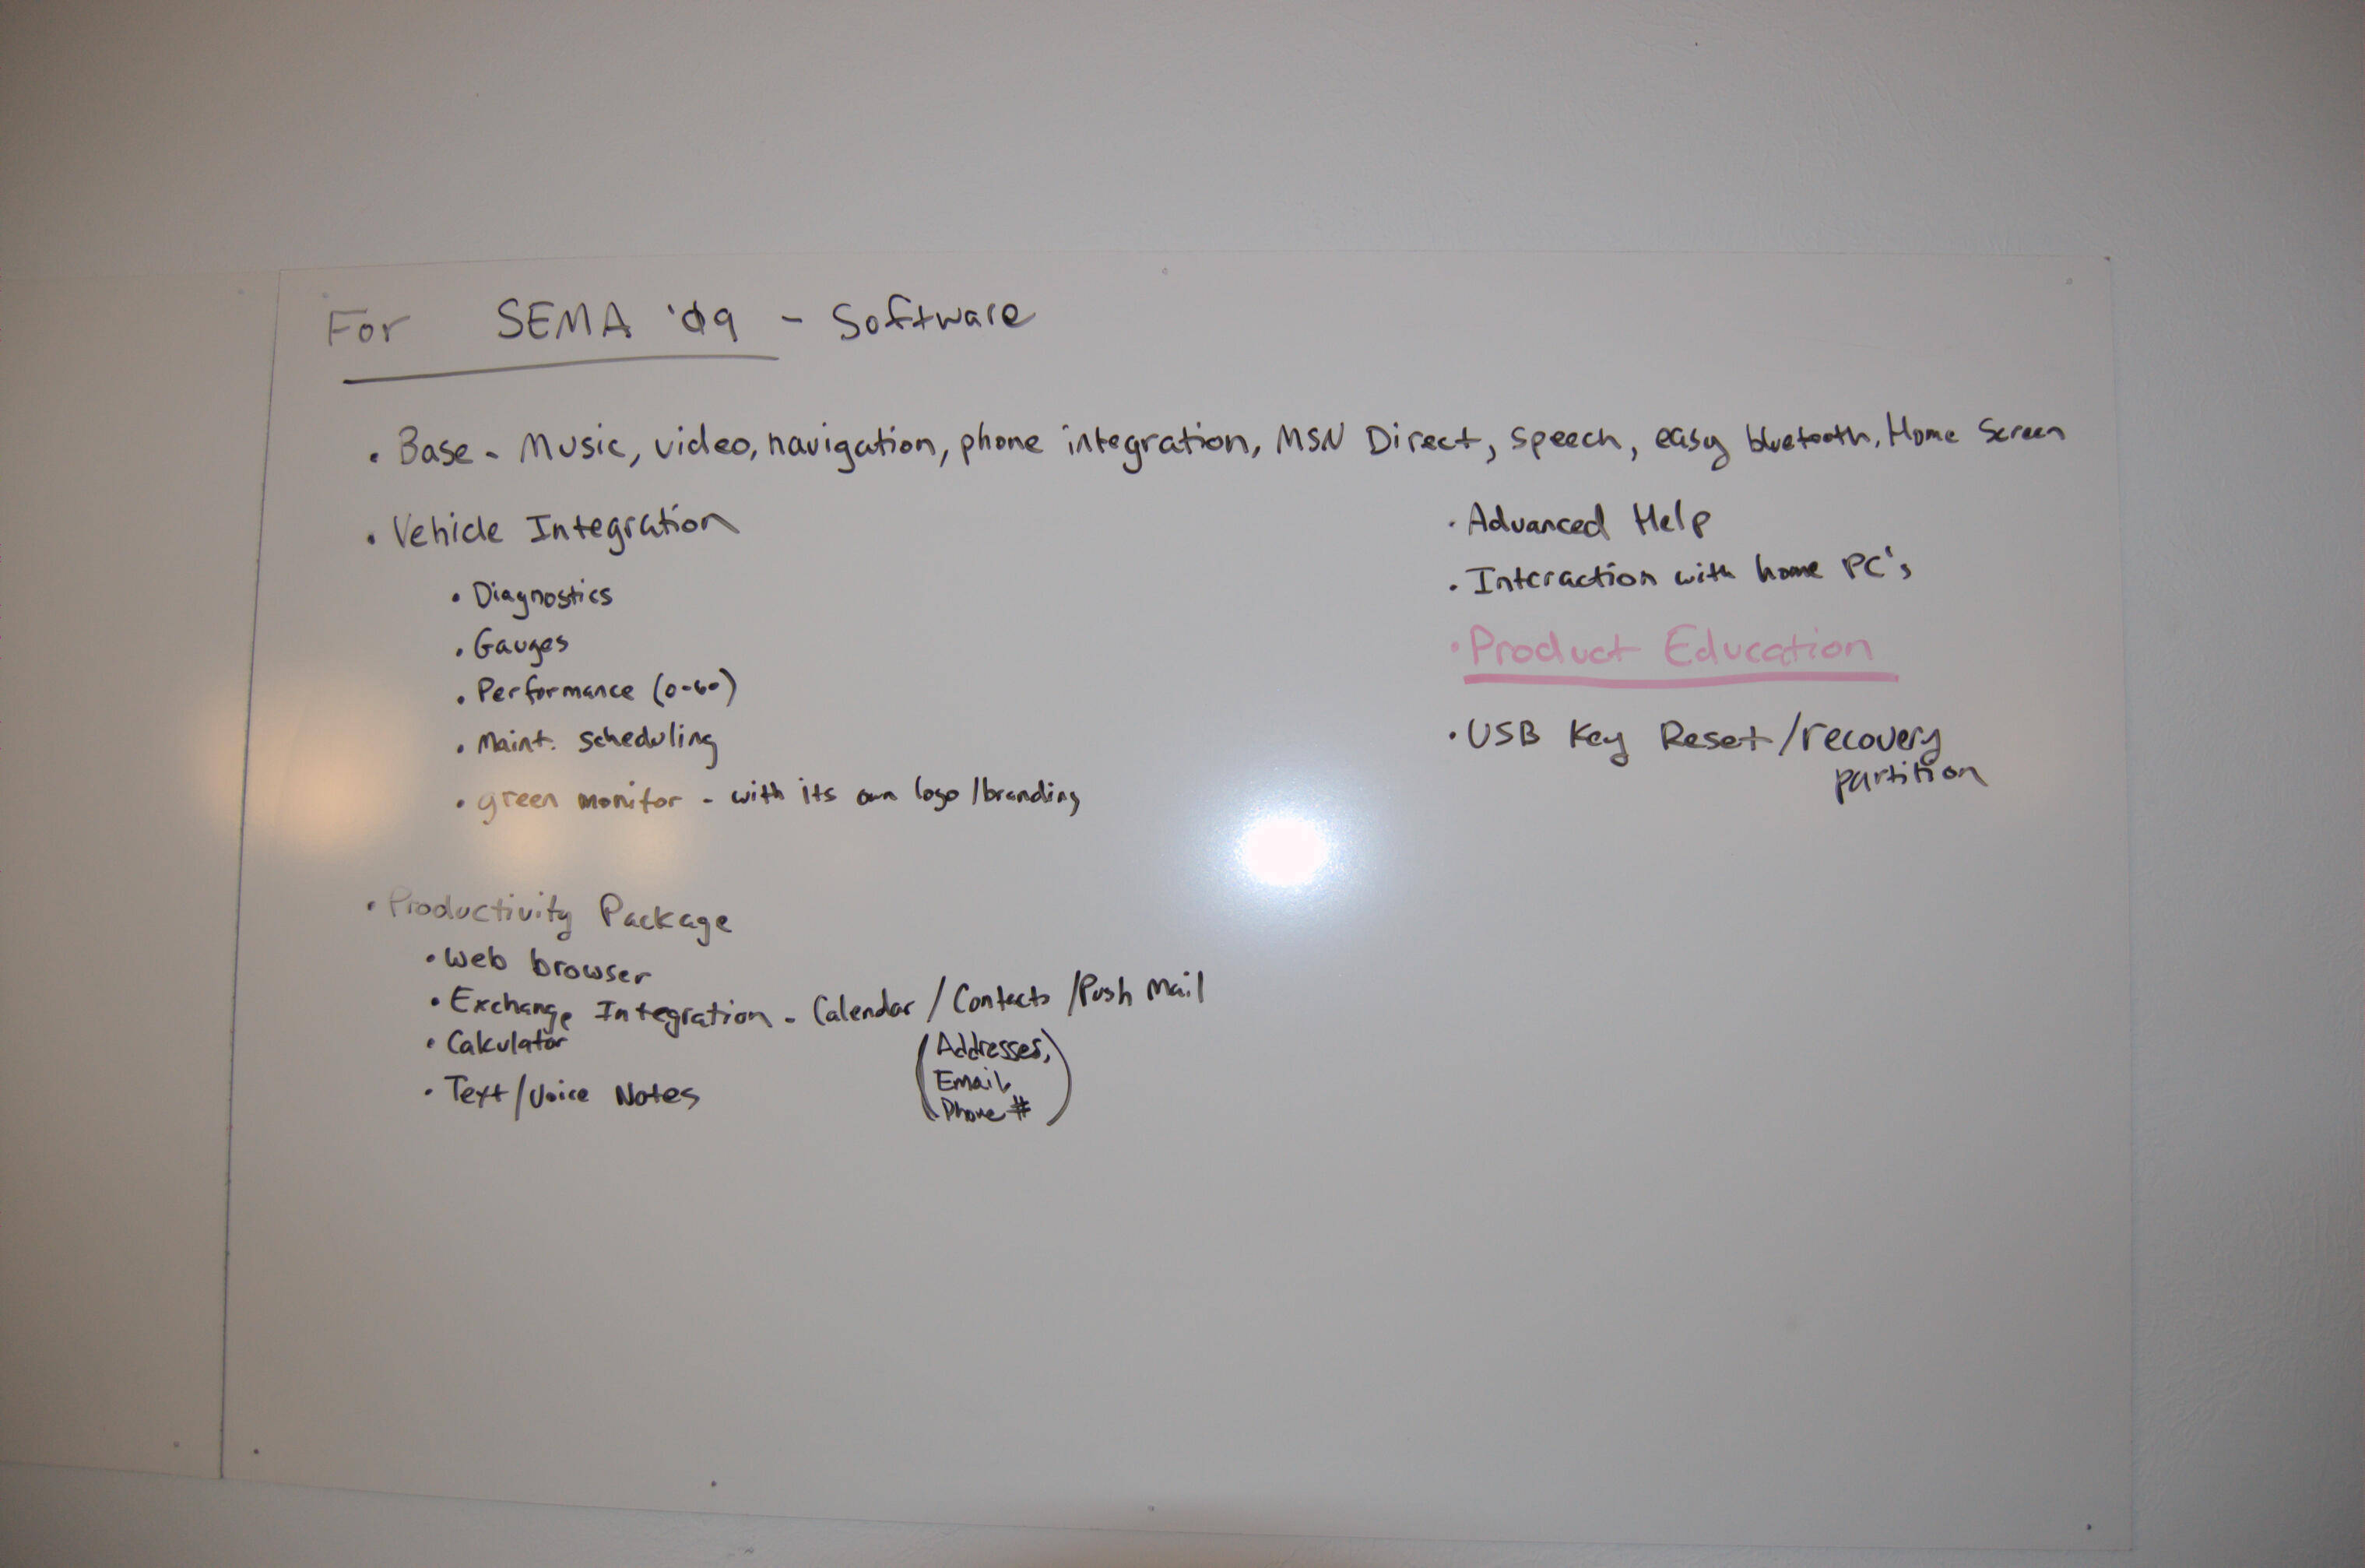 whiteboard with sema 2009 deliverables